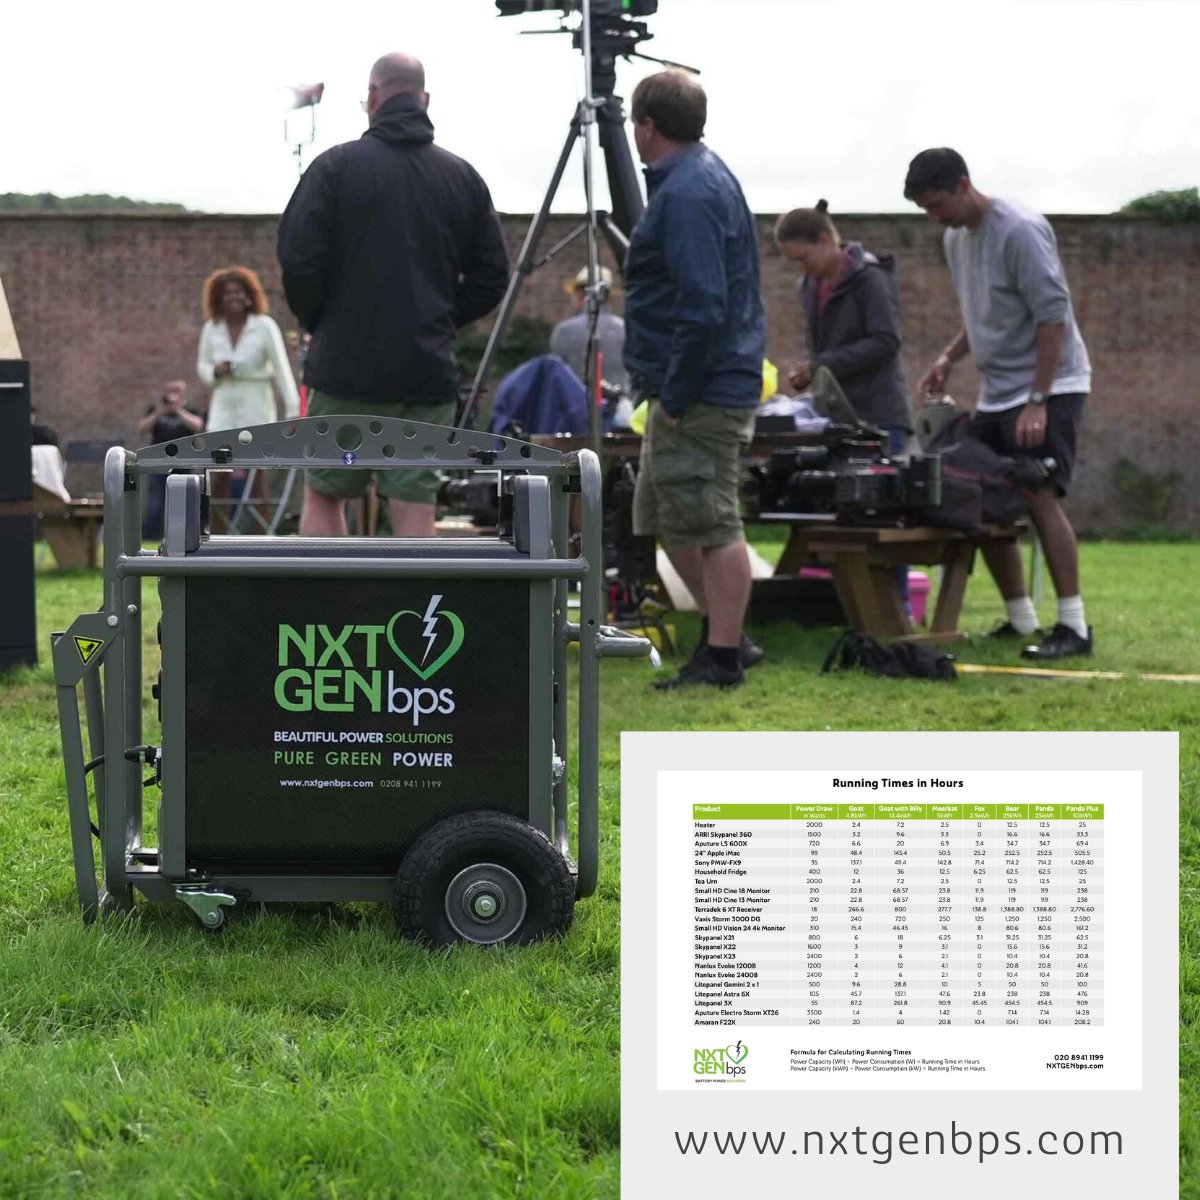 If you’d like more information about the running times of our innovative #zeroemissions generators, we’ve put together a handy quick reference guide for ease. Find it at: bit.ly/3PwNlUU 

#PortablePower #SustainableEnergy #GreenEnergy #BatteryPower #GreenPower